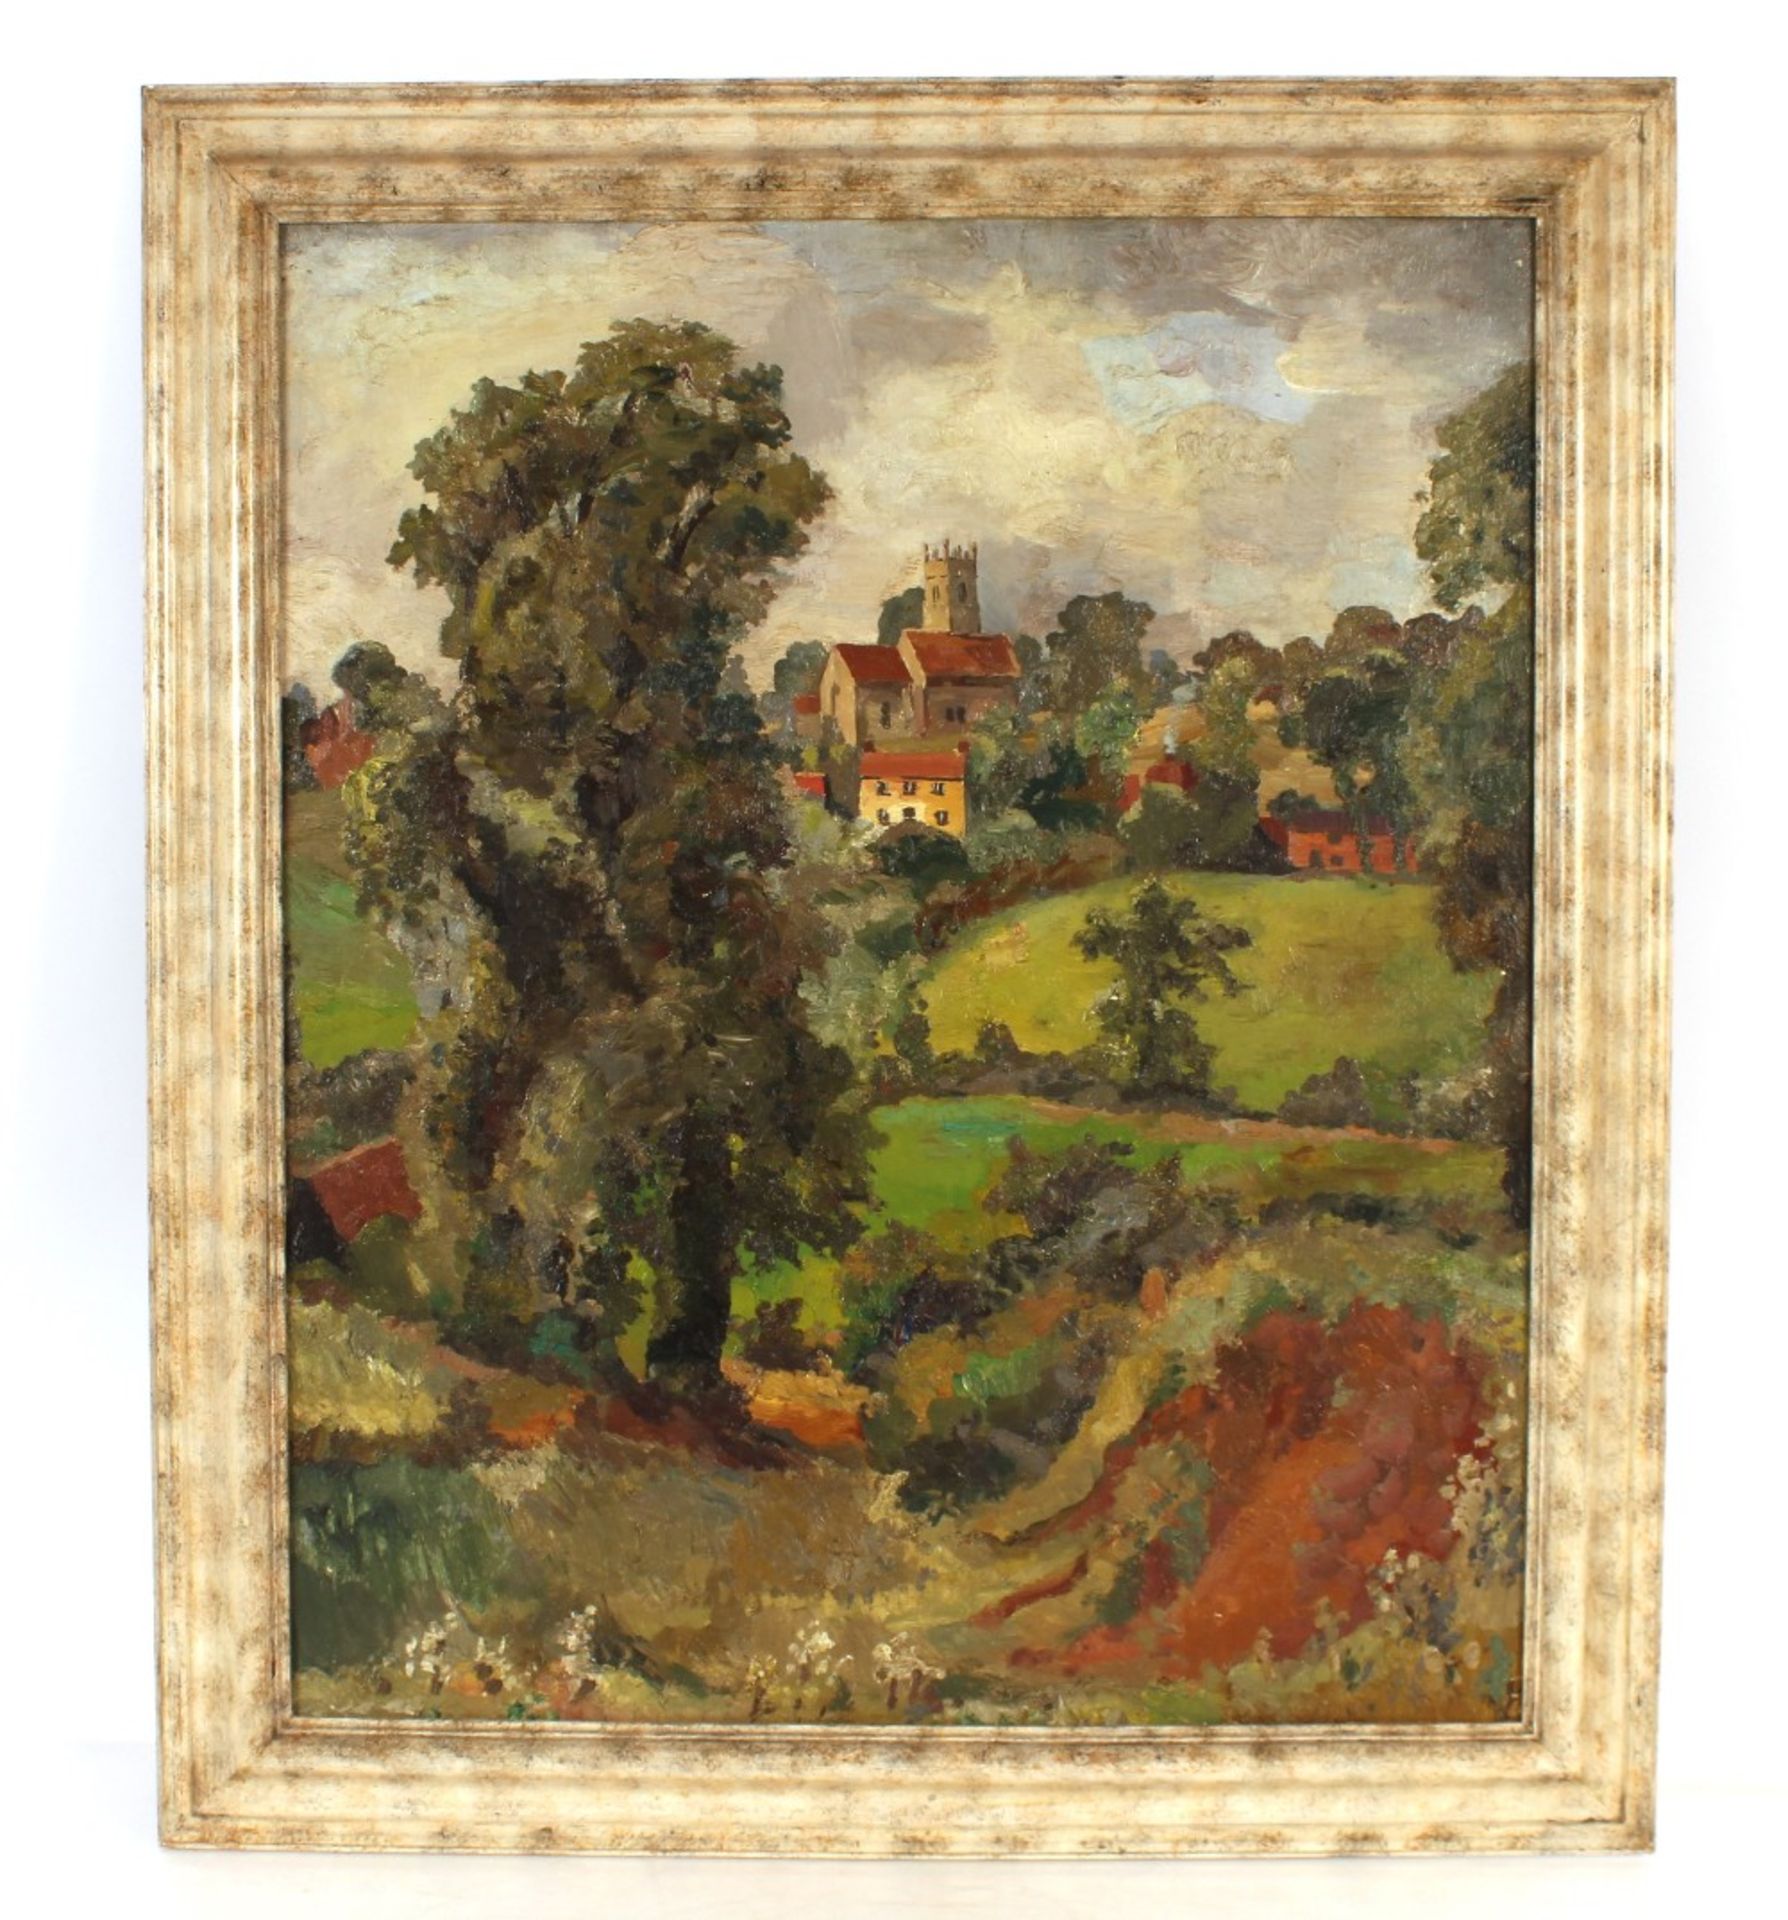 Attributed to Allan Walton, study of a rural village in rolling landscape, unsigned oil on canvas, - Image 2 of 19